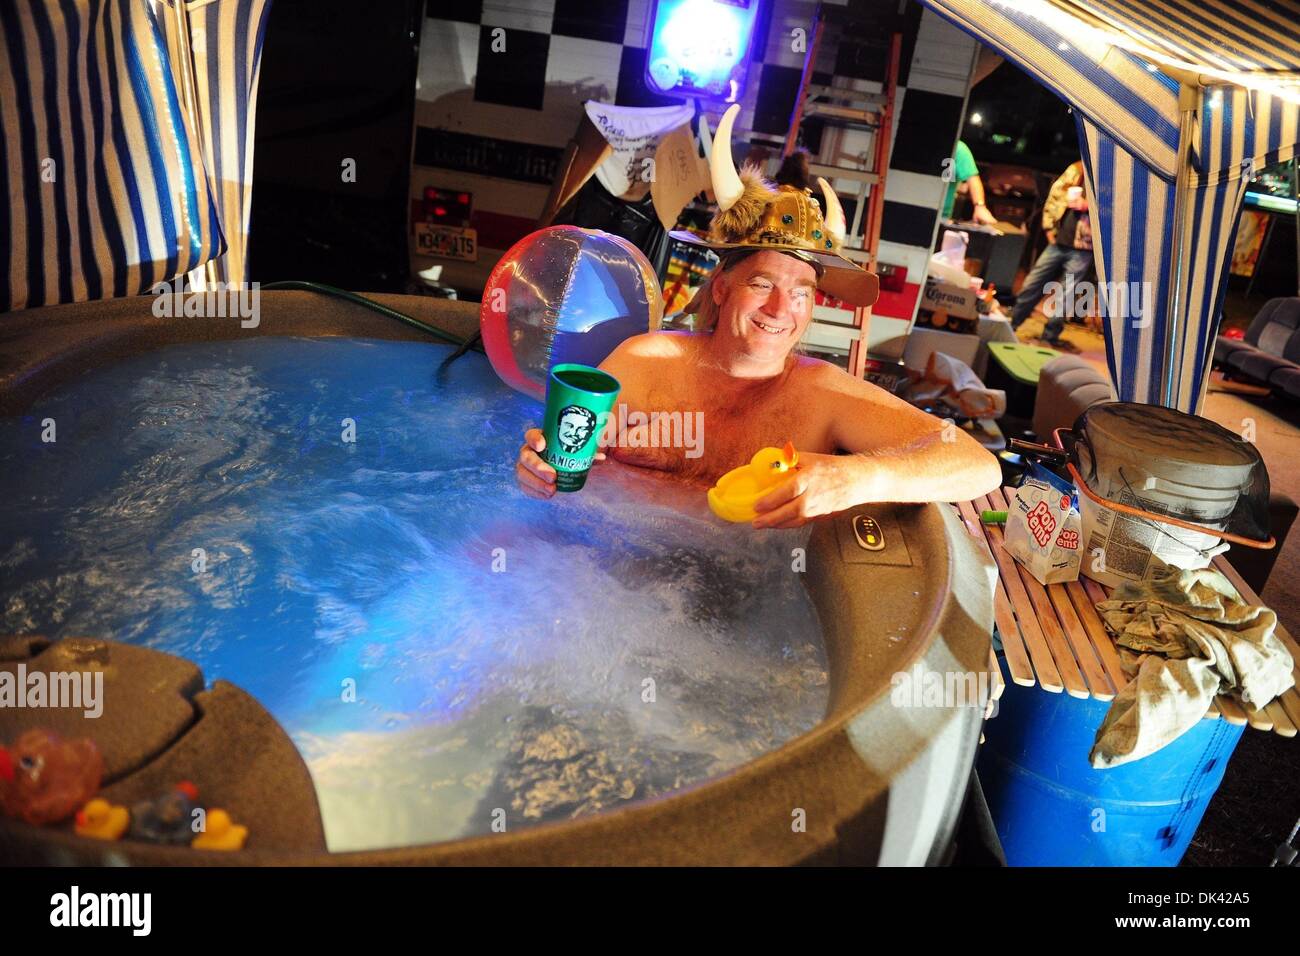 Mar 18, 2011 - Sebring, Florida, U.S. - SHAUN SCOTT, of West Palm Beach, Florida, wears a viking hat while he enjoys his jacuzzi in the infield during night practice for the 12 Hours of Sebring. (Credit Image: © Rainier Ehrhardt/ZUMA Press/Rainier Ehrhardt) Stock Photo